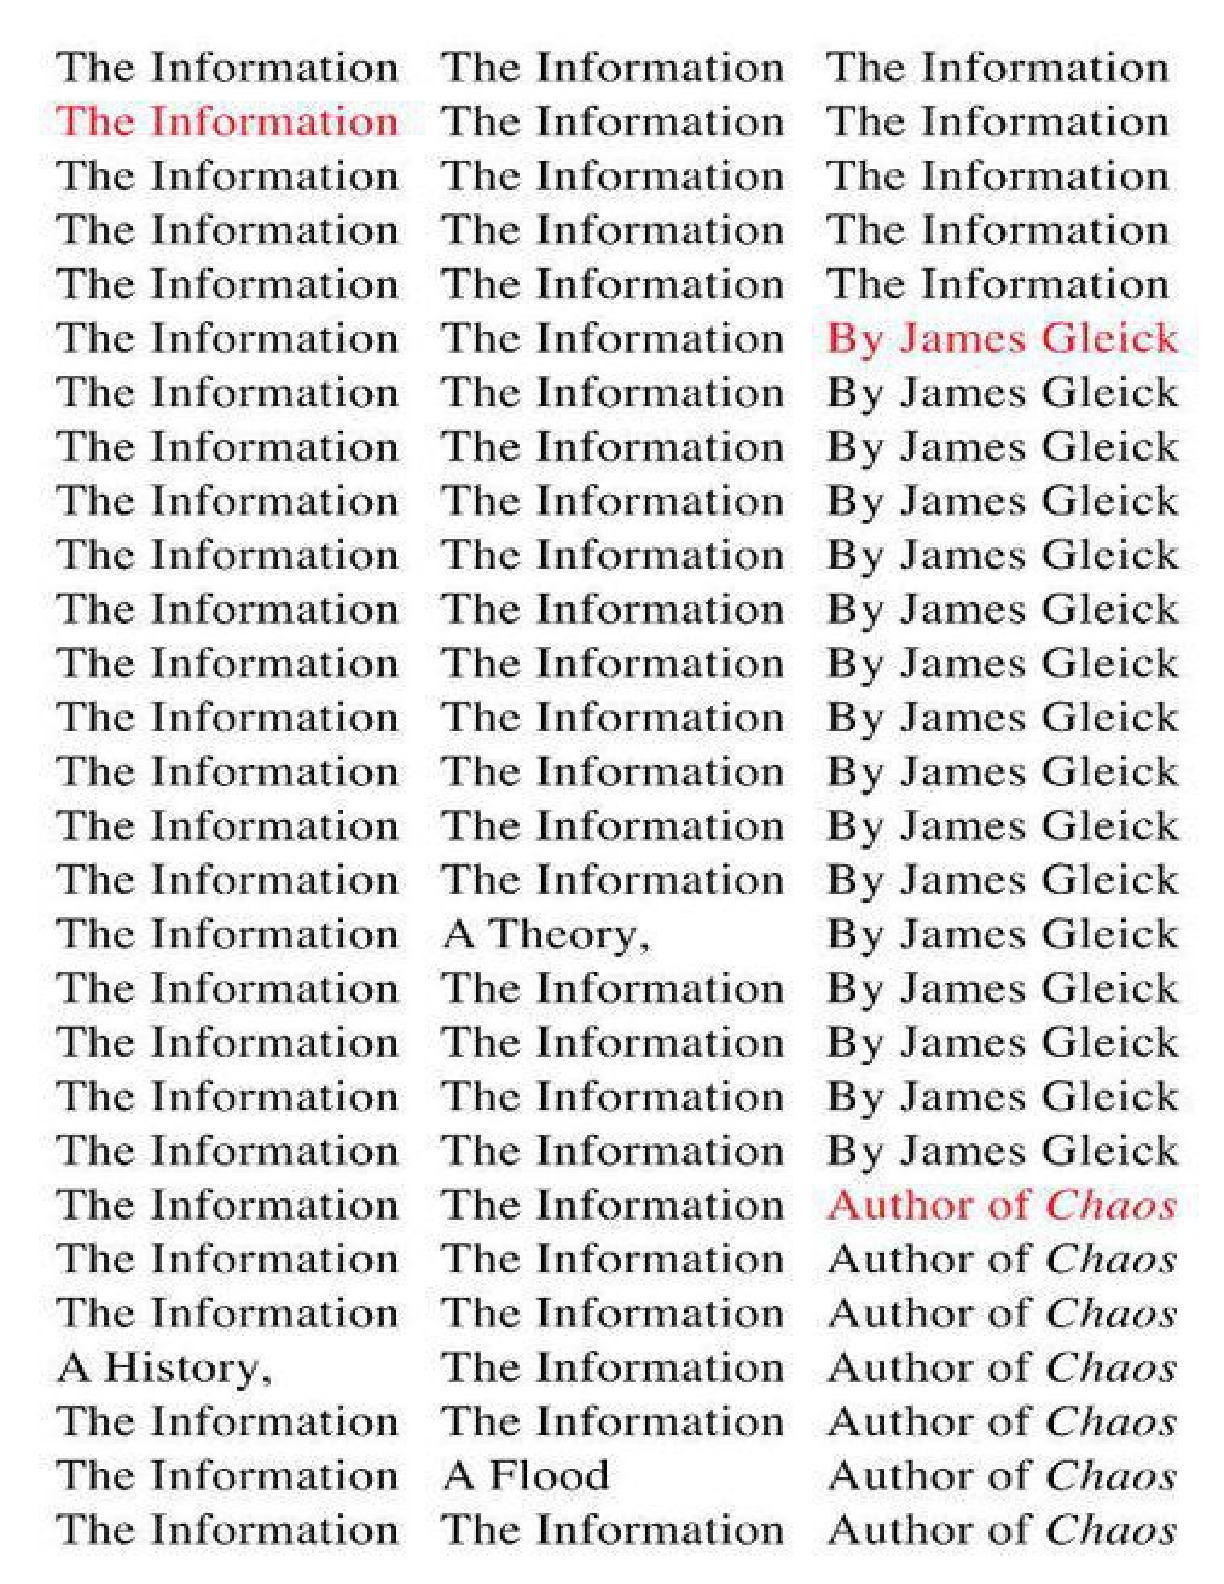 Information, The – James Gleick